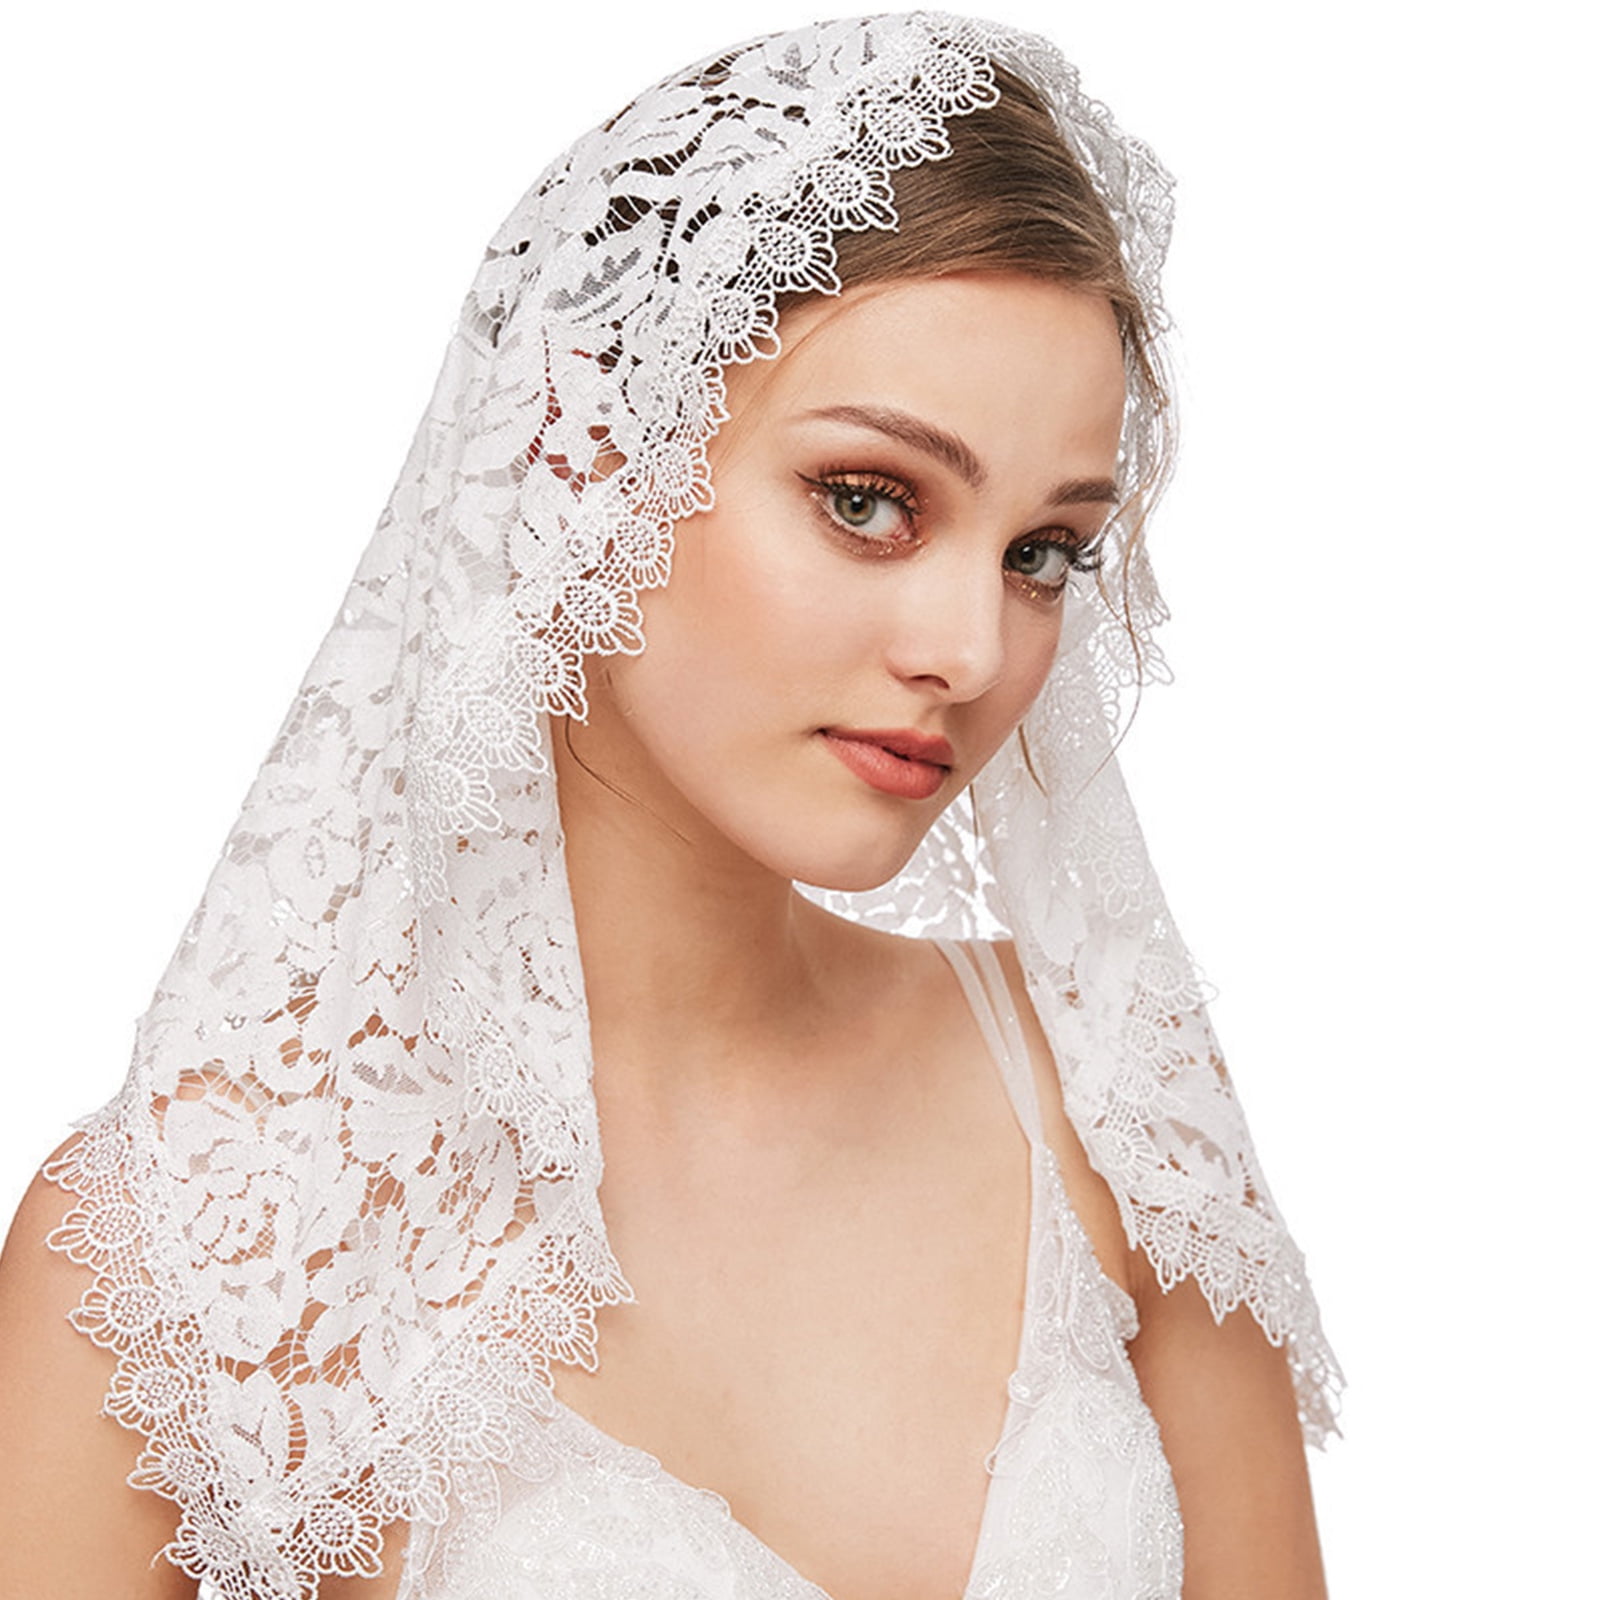 Lace Mantilla Catholic Church Veil Floral Pattern for Head Coverings ...